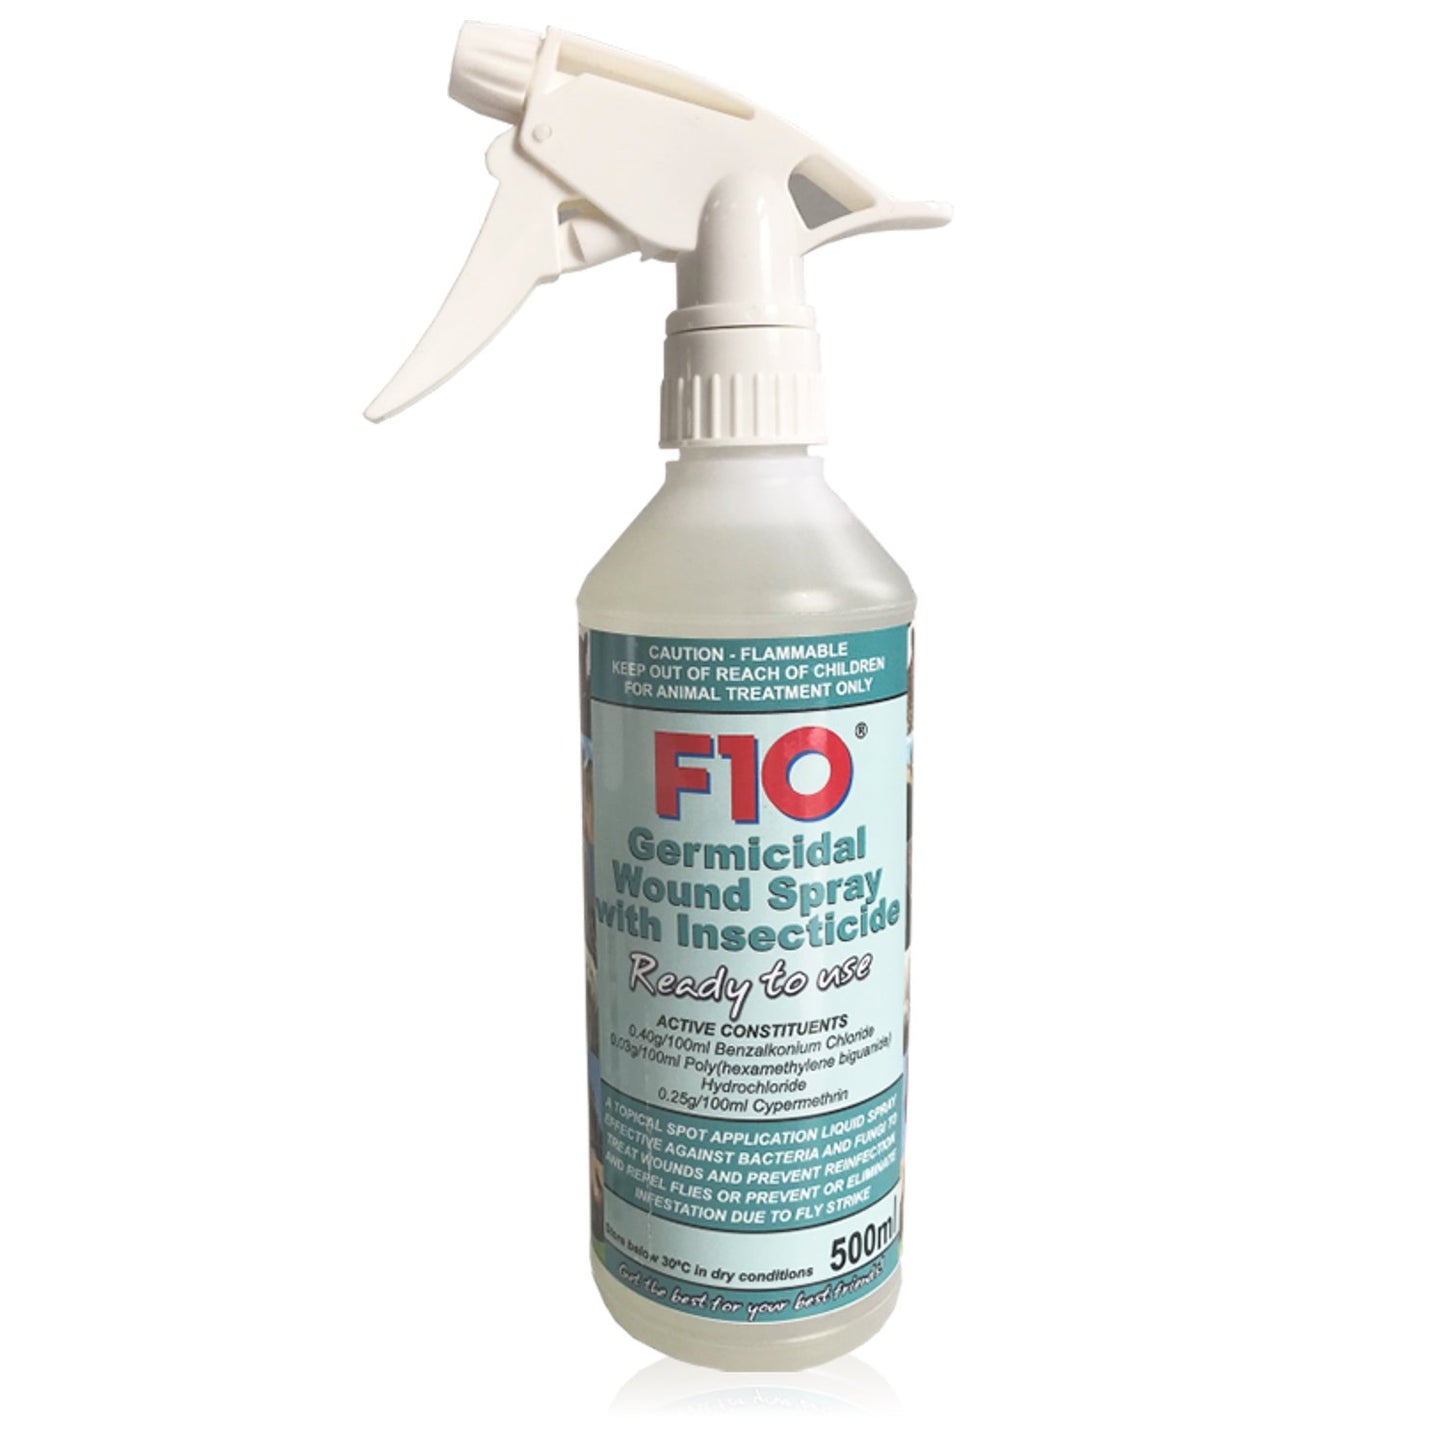 F10 Antiseptic Wound Spray with Insecticide 500ml, F10 Products